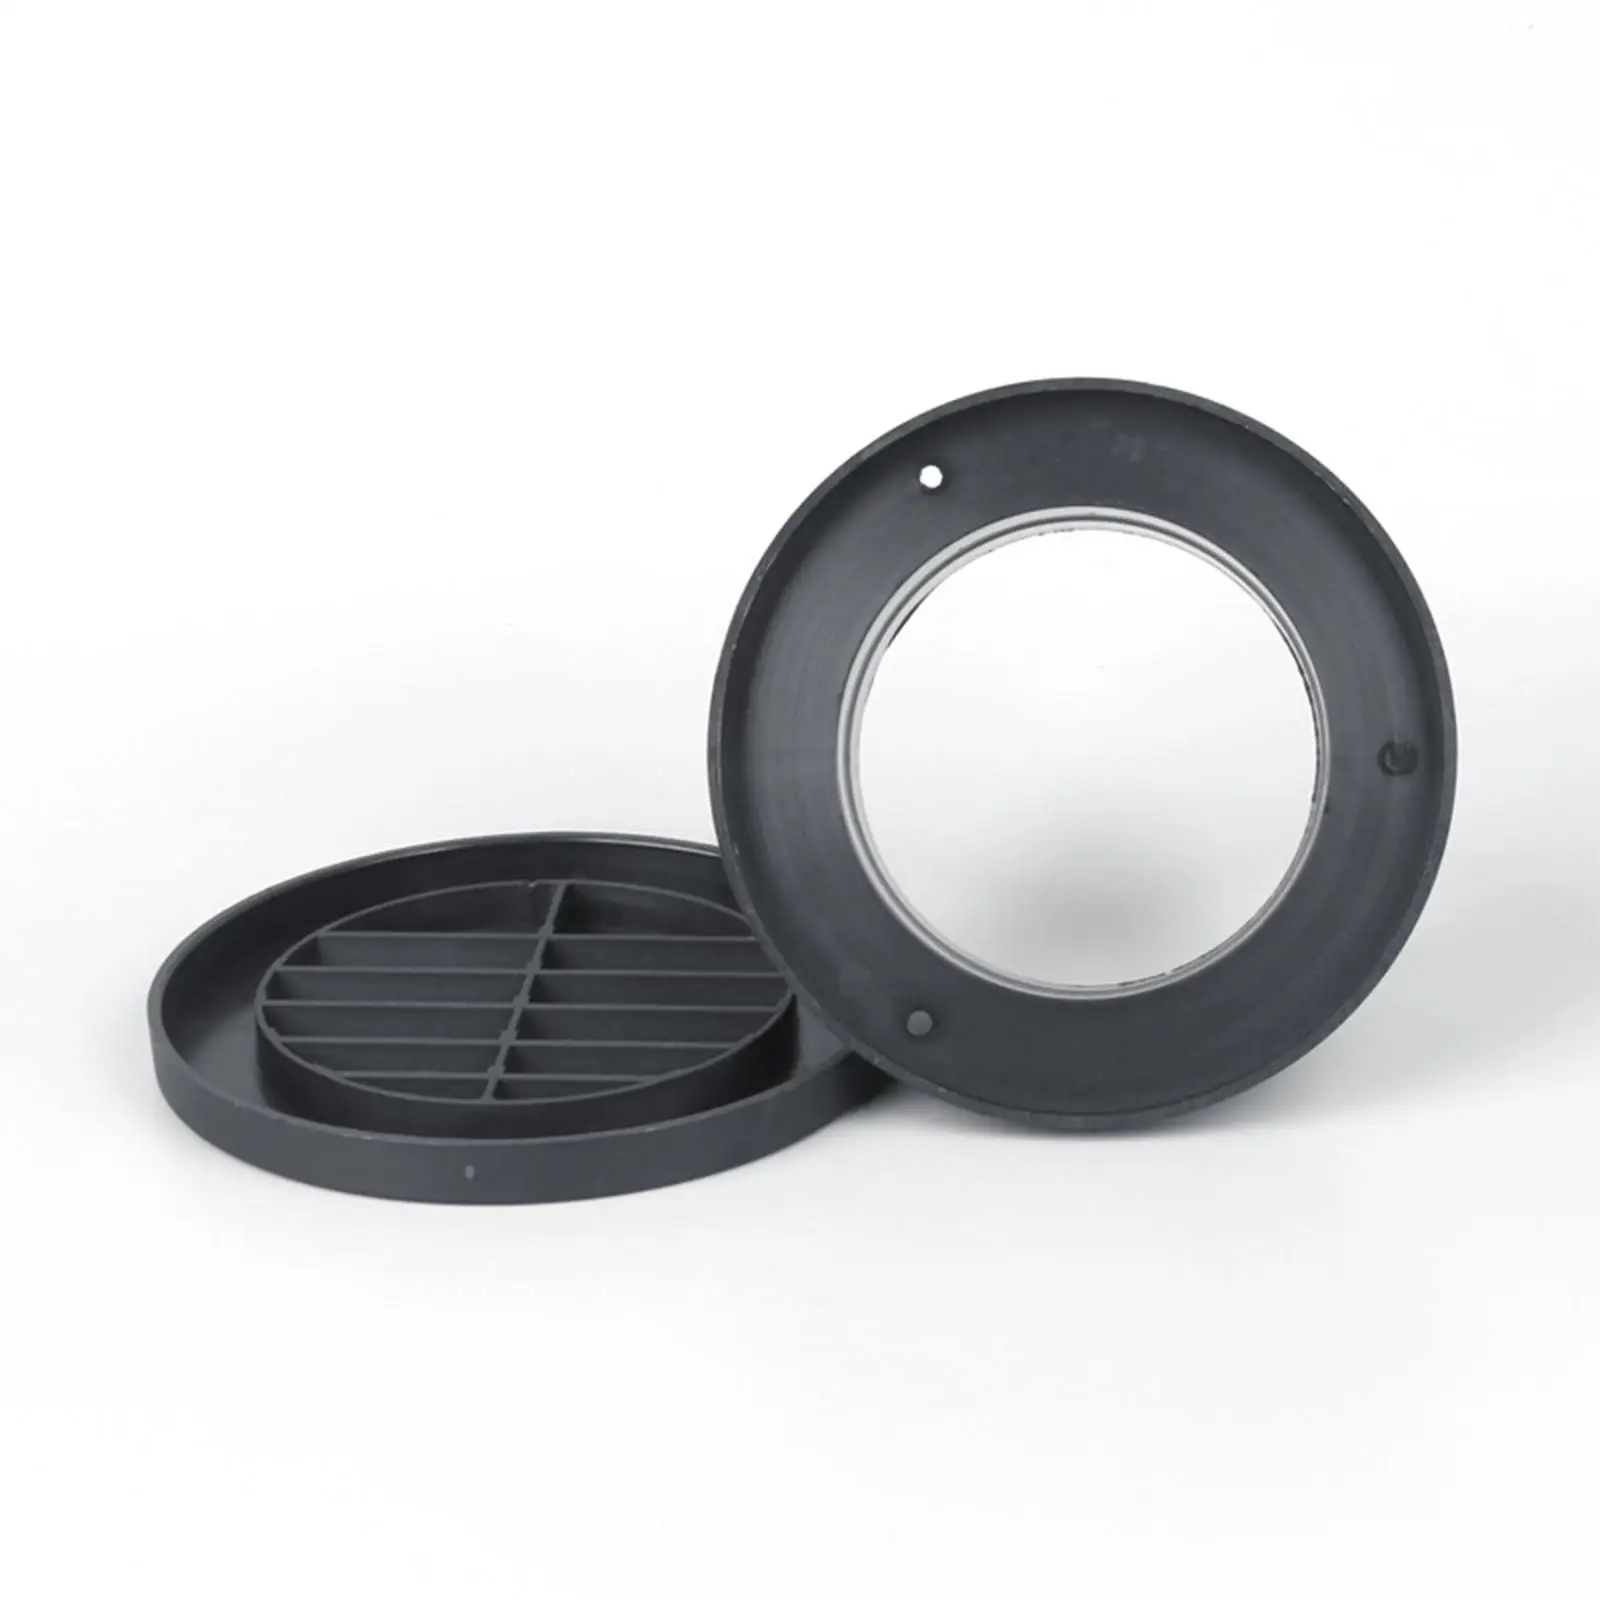 Black Air Vent Ducting Piece Air Ducting Pipe Assembly 90mm Round Vent Cover